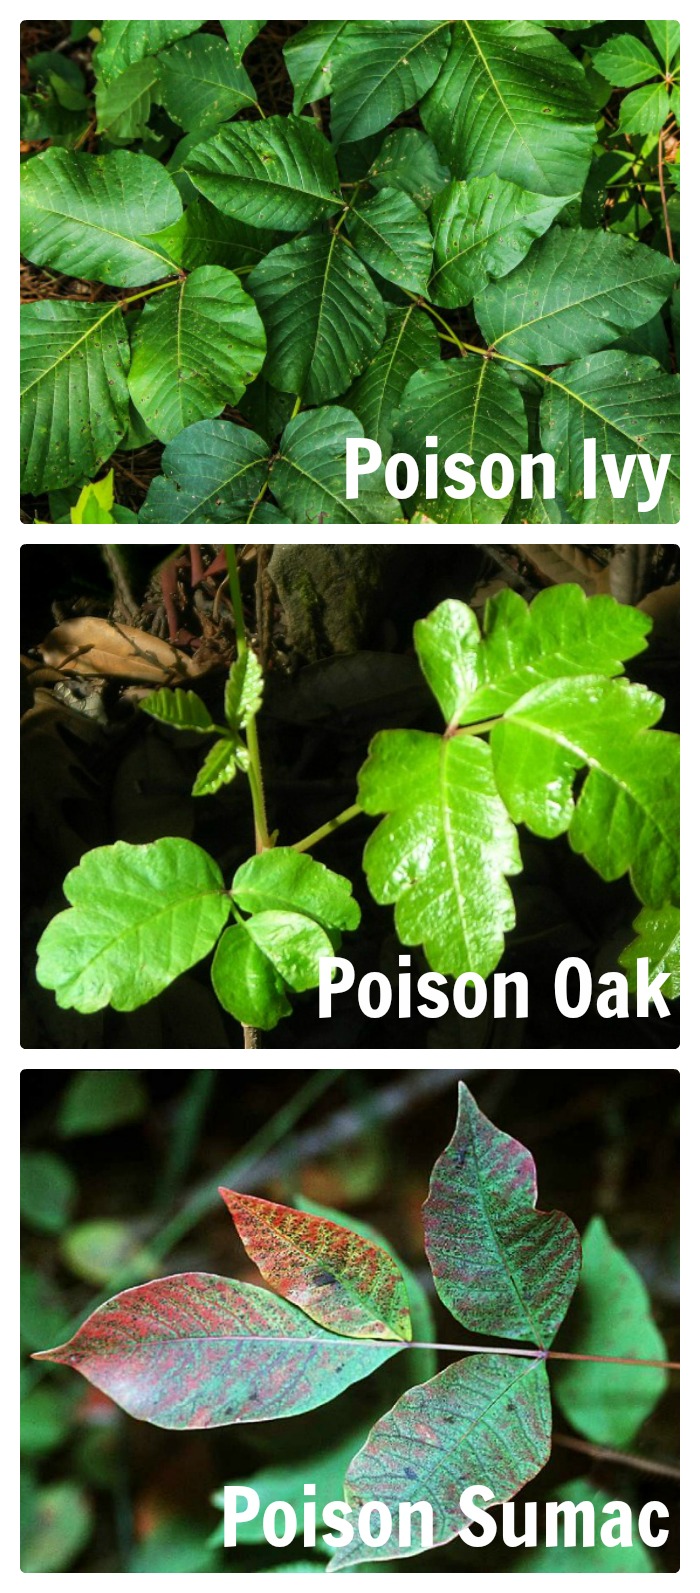 Poison Ivy Prevention Natural Ways To Treat This Invasive Weed,Studio Layout